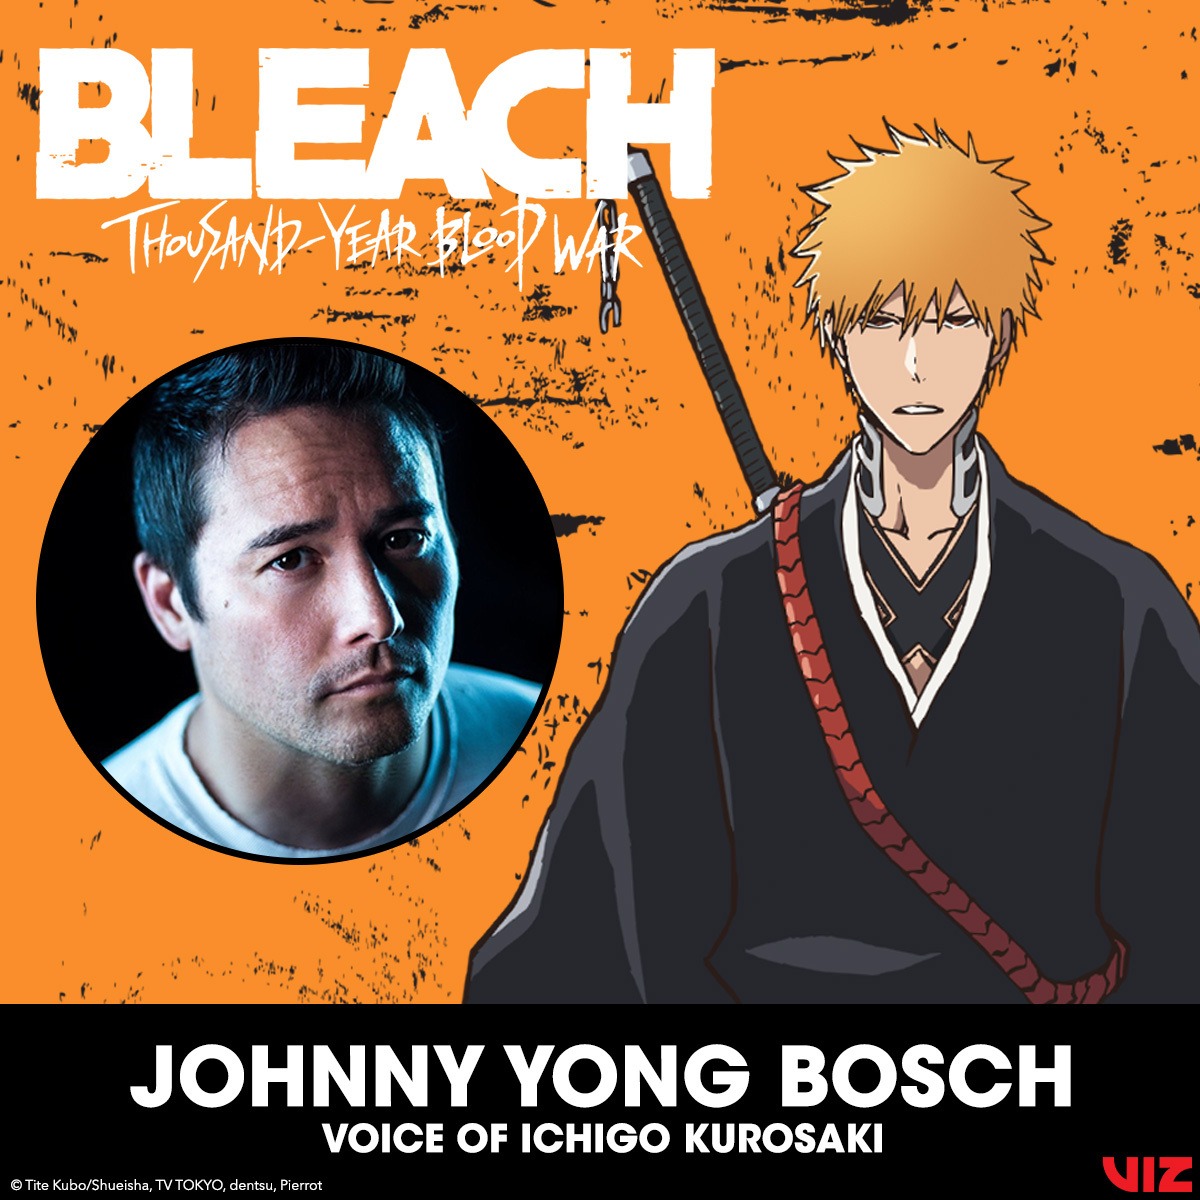 Bleach: Thousand Year Blood War brings the series back better than ever  before